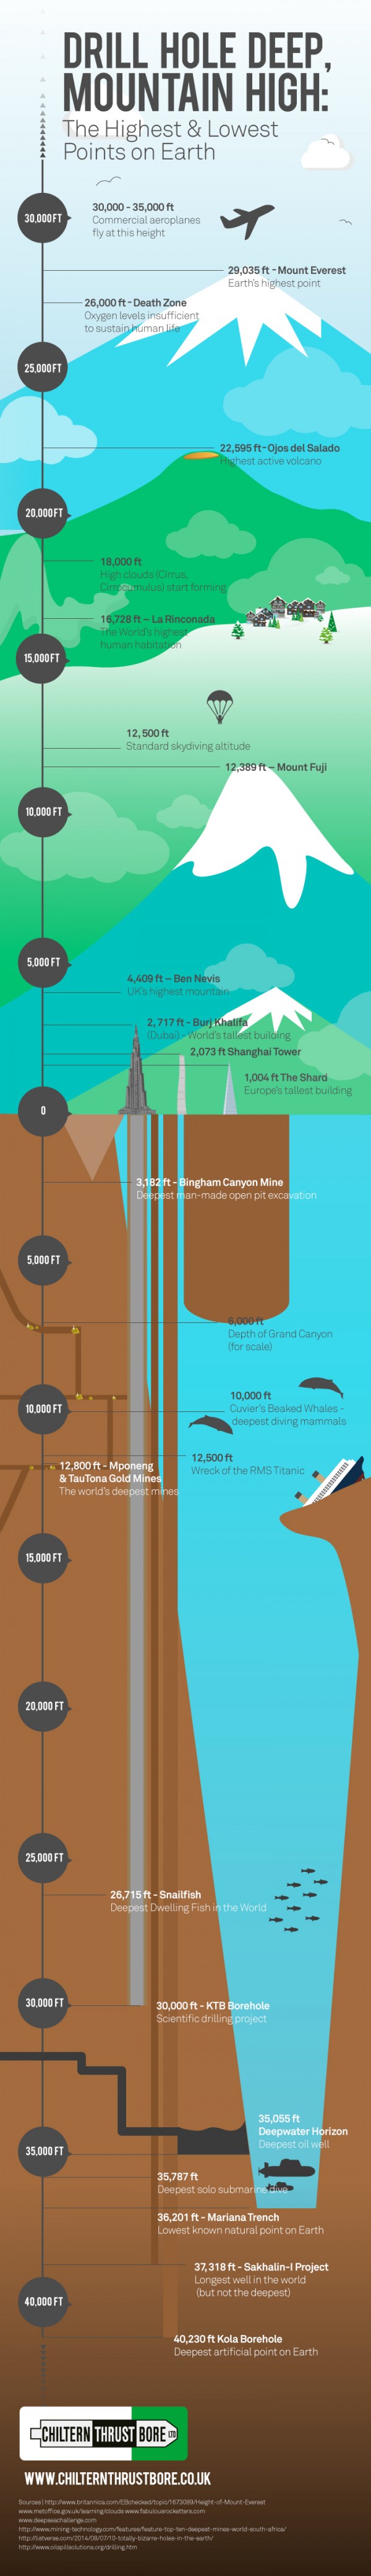 a chart showing the highest and lowest points on Earth : Drill Hole Deep [ Mountain High ]